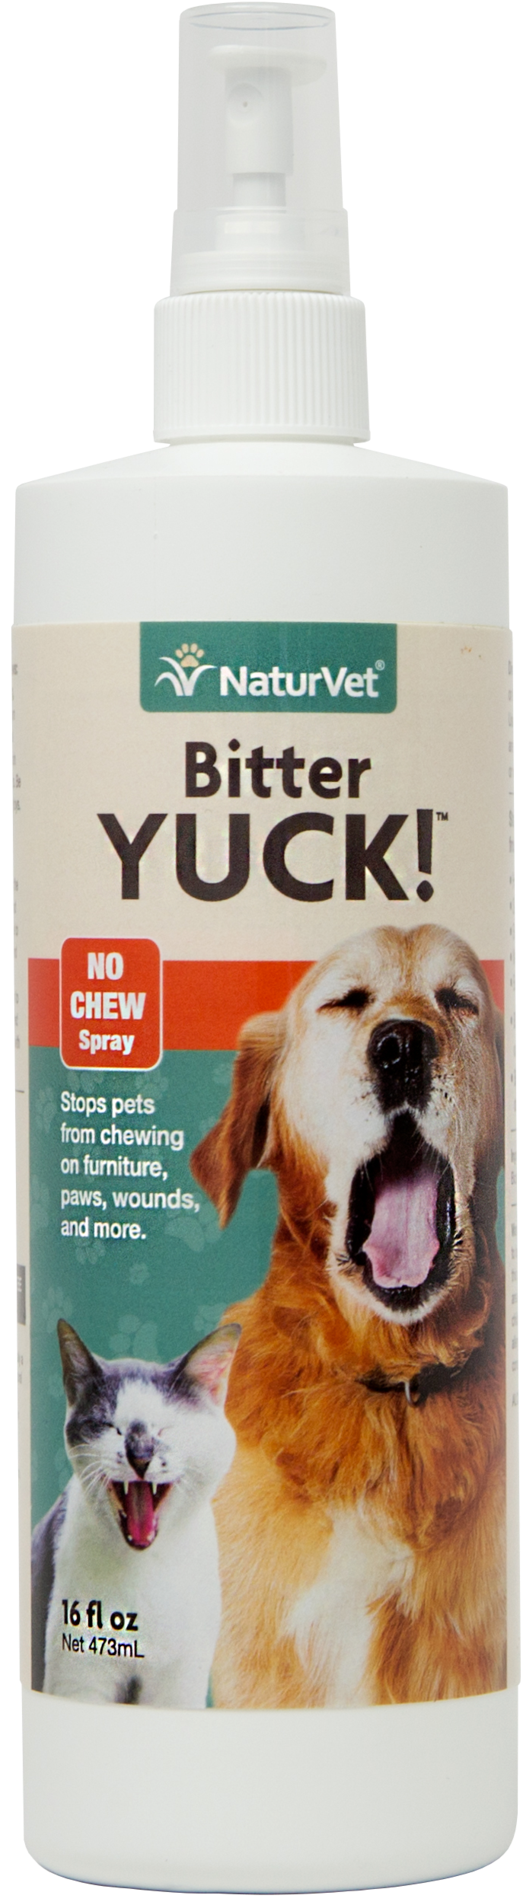 Bitter Yuck S 16oz Nv 09002 V=1456942226 - Naturvet Bitter Yuck! No Chew Spray For Dogs And Cats (702x2048), Png Download